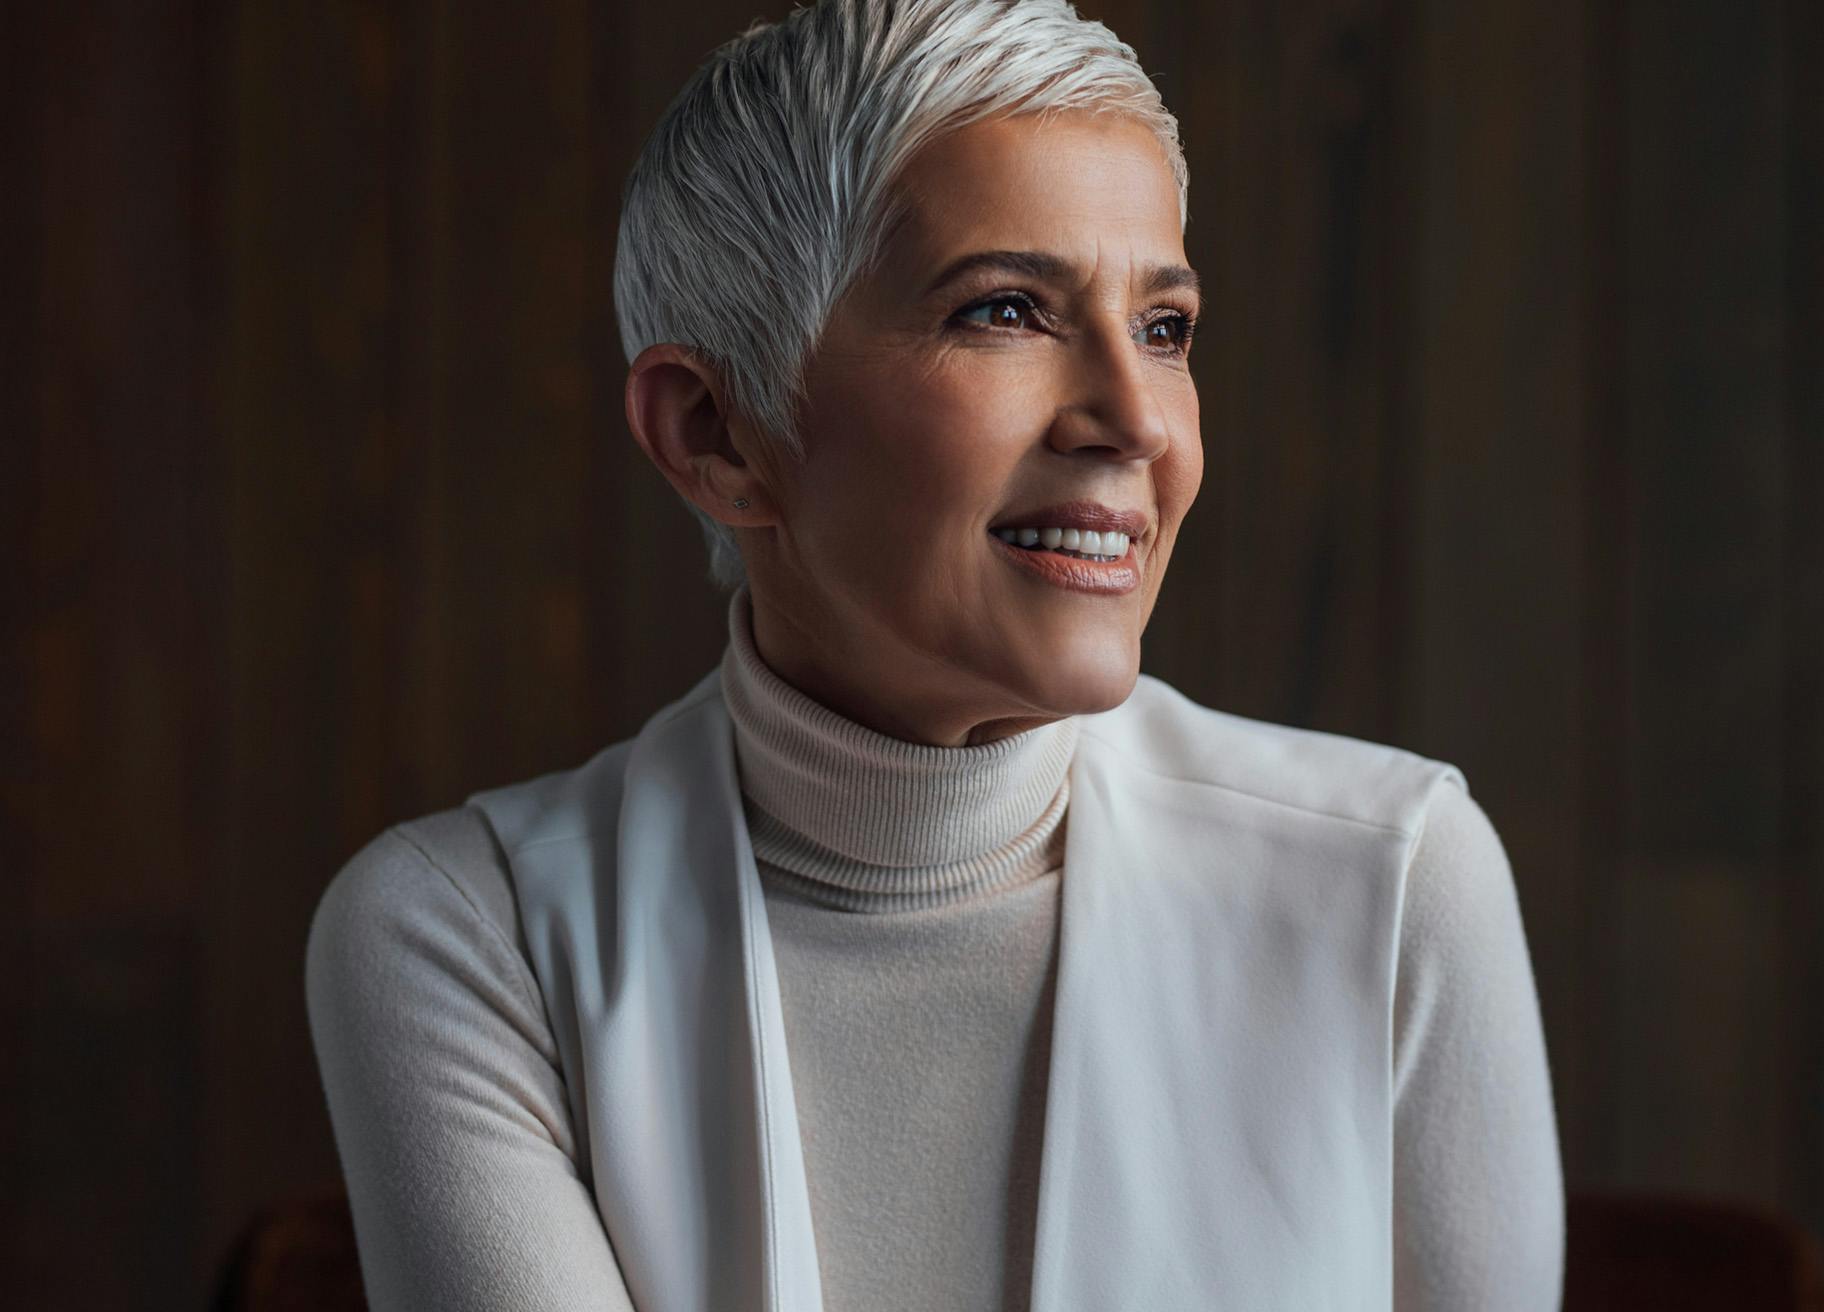 Woman with short grey hair wearing a white turtleneck top